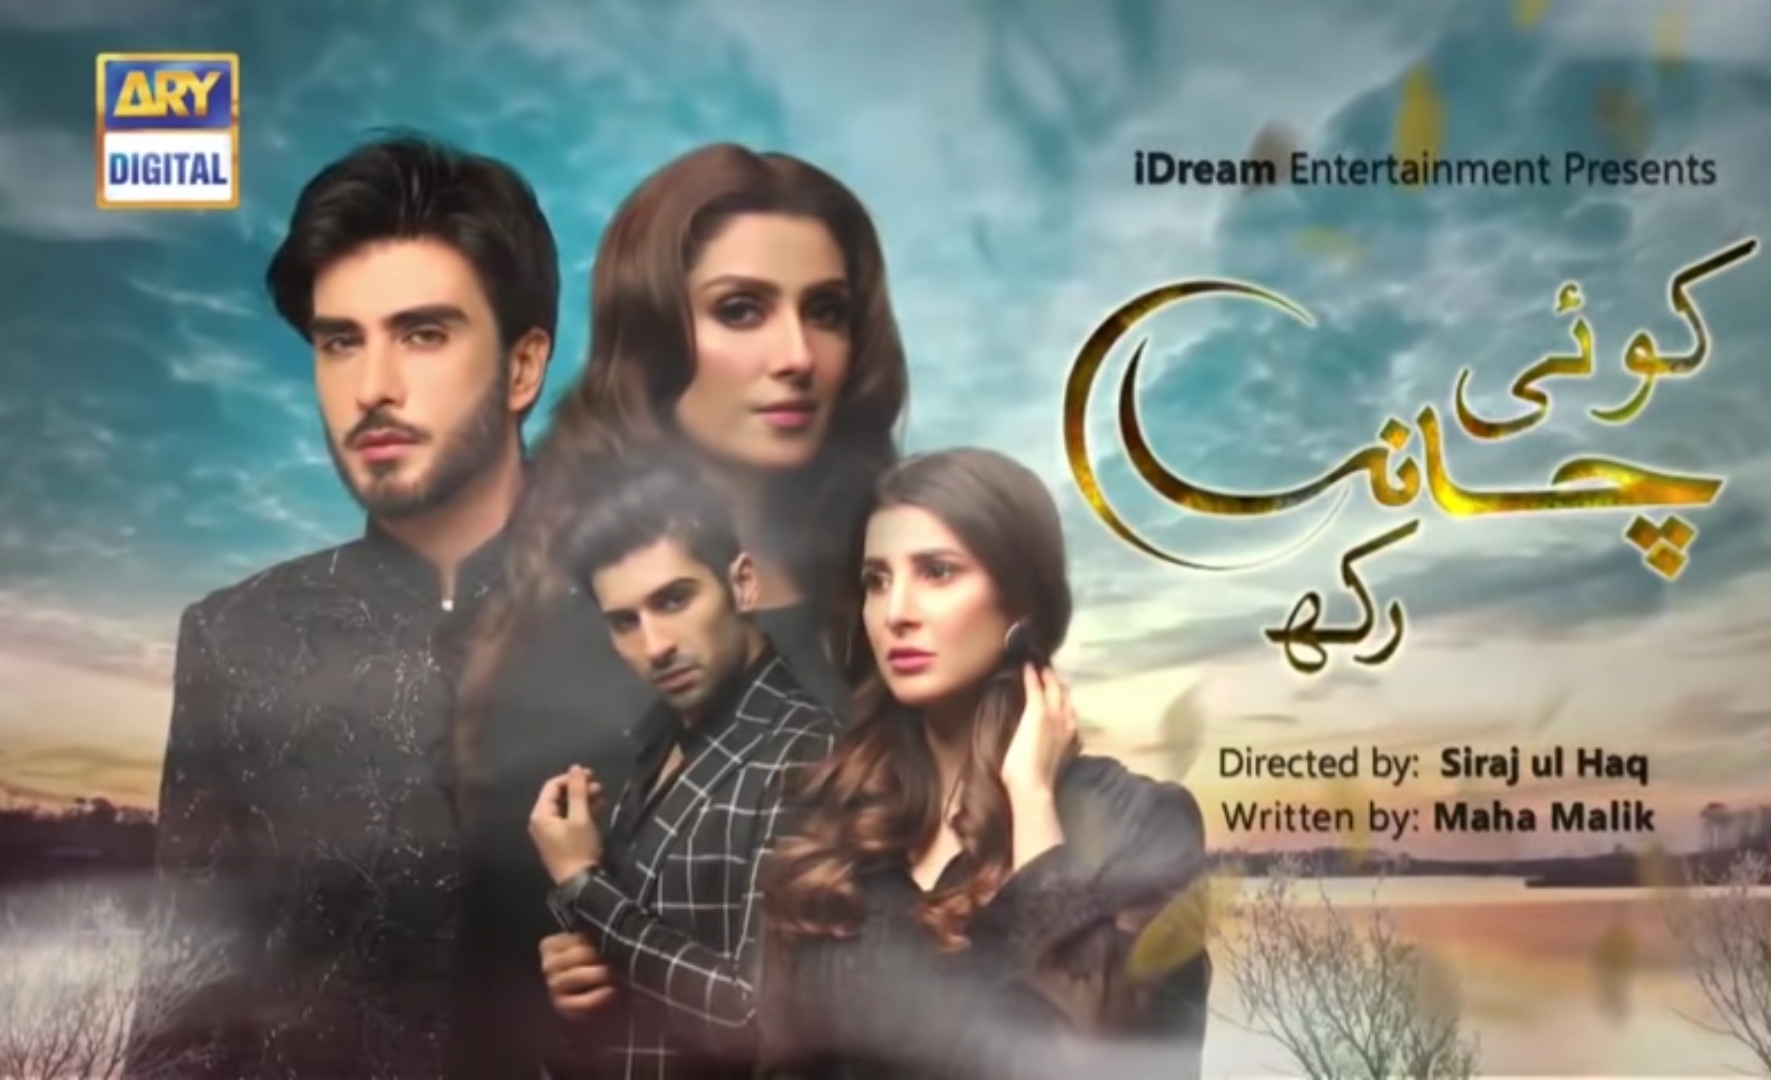 Koi Chand Rakh Episode 11 Story Review - Nothing Special